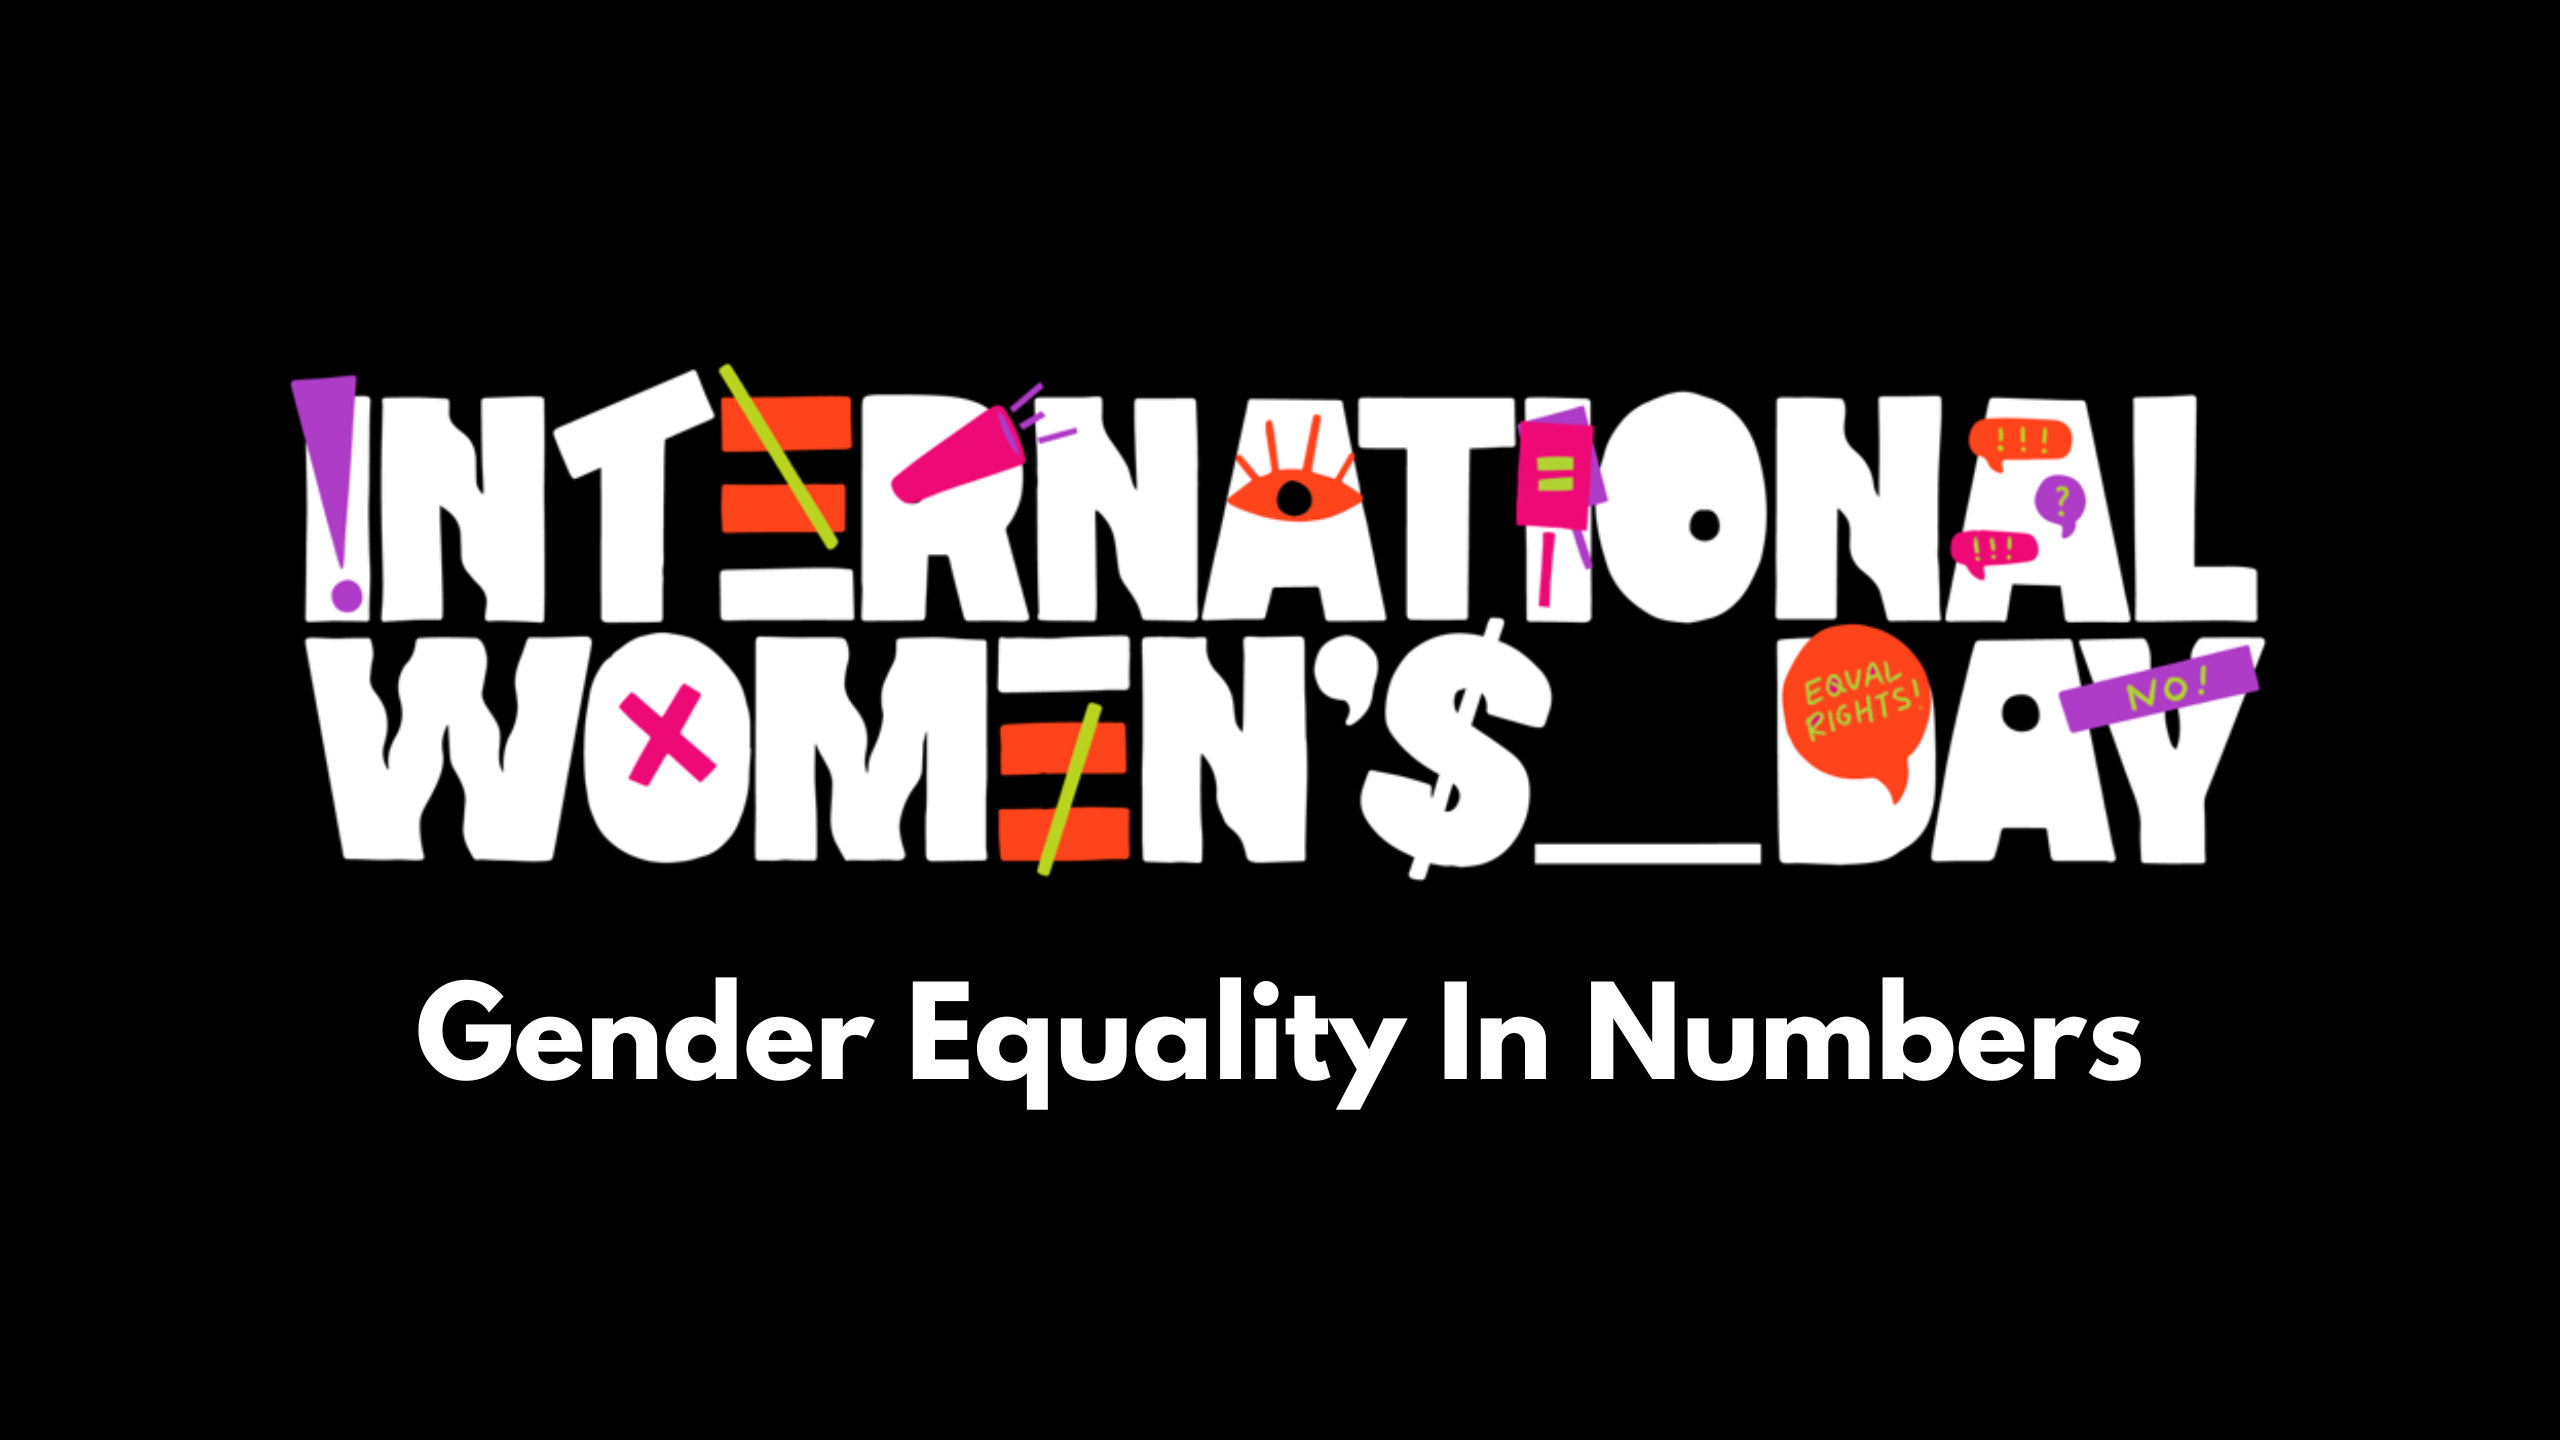 The text 'International Women's Day' is written in a stylised, wavy font. It is surrounded by icons that represent the activist roots of the day and the global feminist movements fighting for gender equality such as banners and the word ‘No’. Below is written 'Gender equality in numbers.